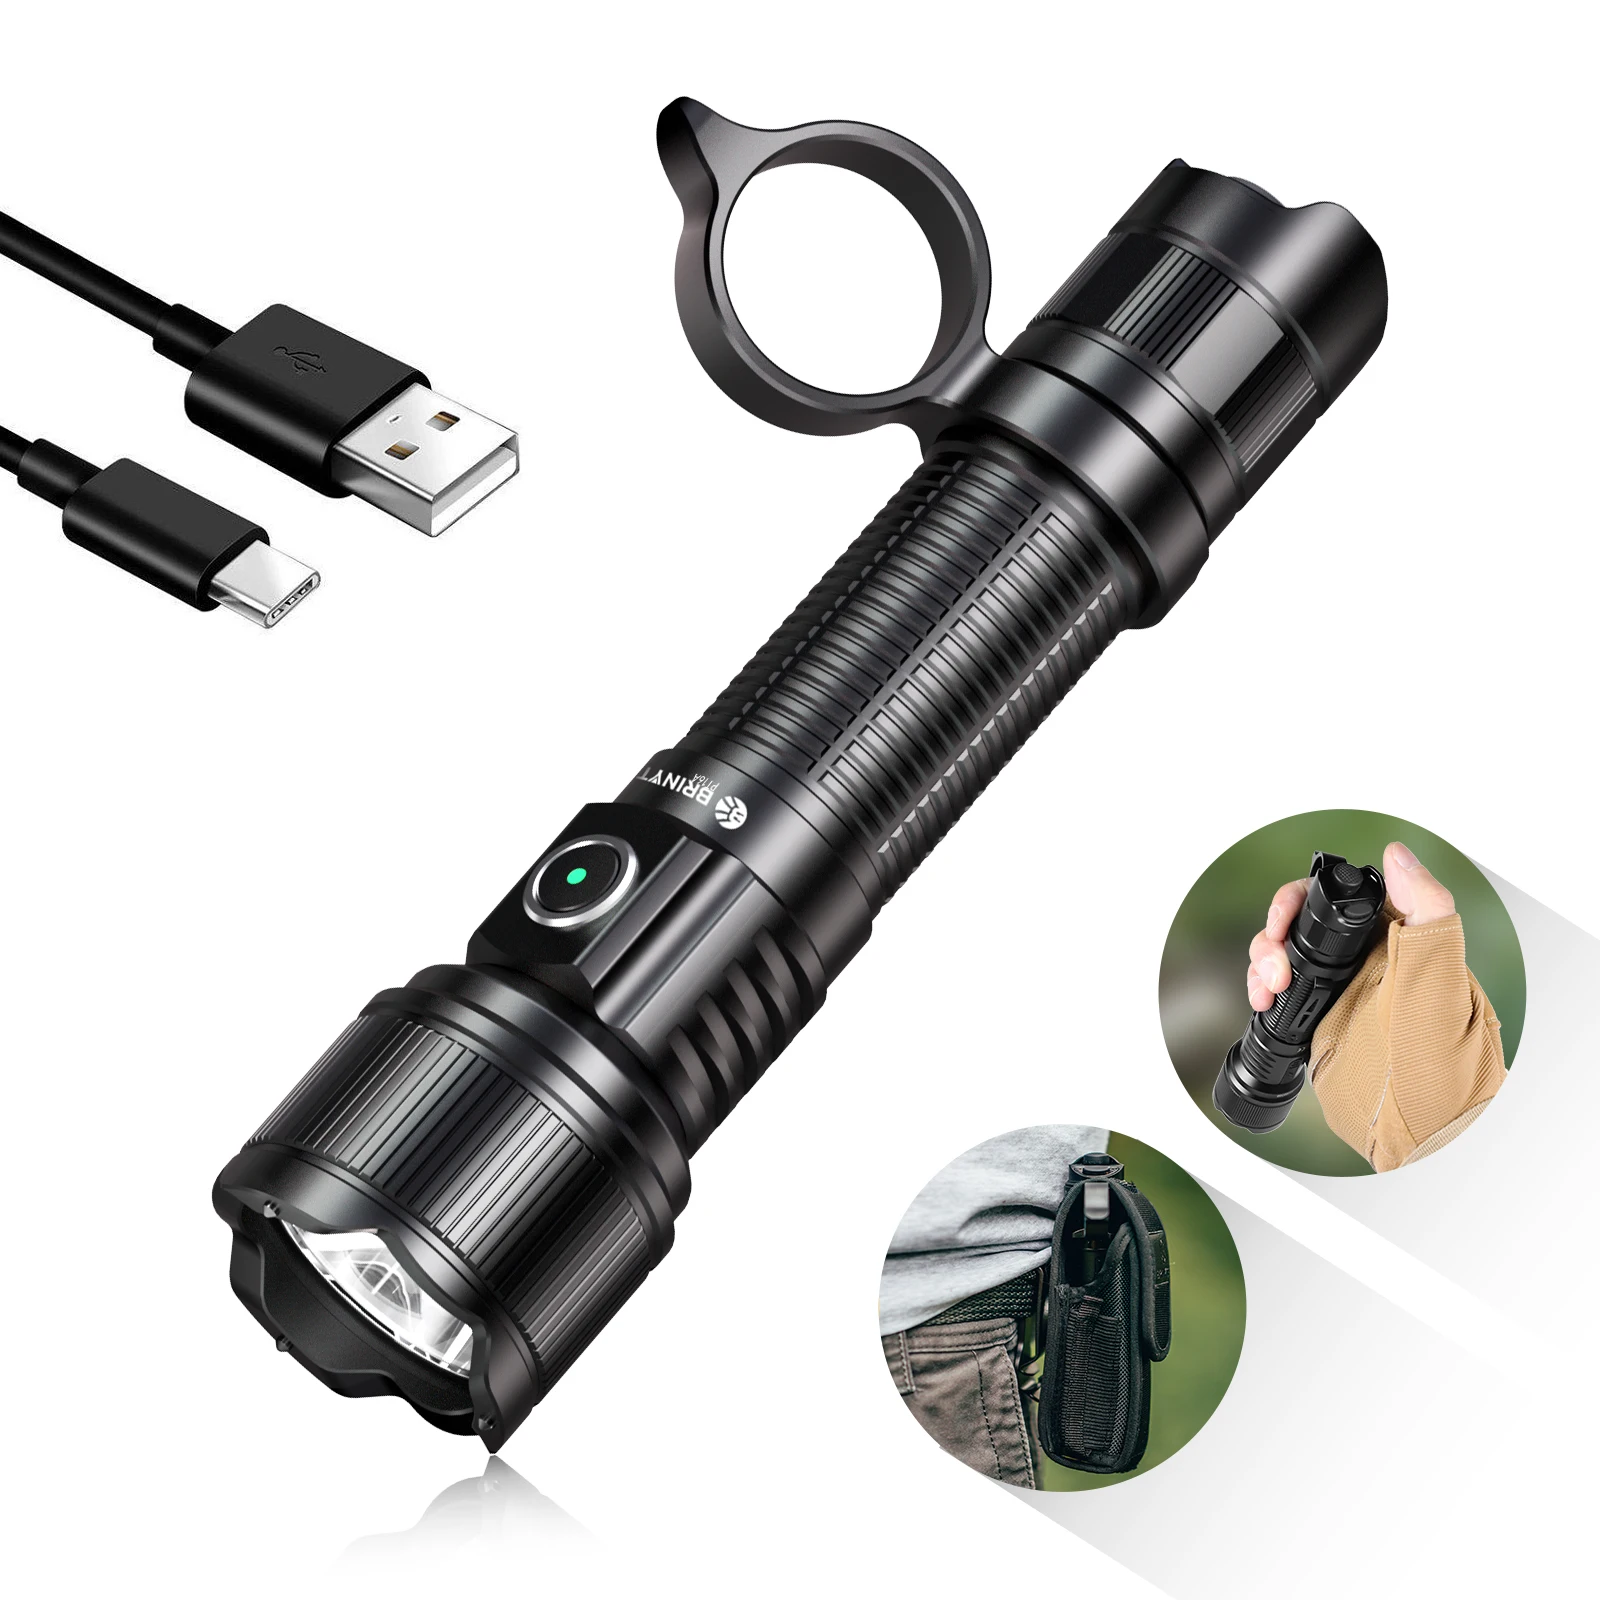 

Brinyte PT16A Flashlight 3000 Lumens Powerful Hunting Searchlight Army Military Tactical Flashlight Rechargeable LED Torch Light